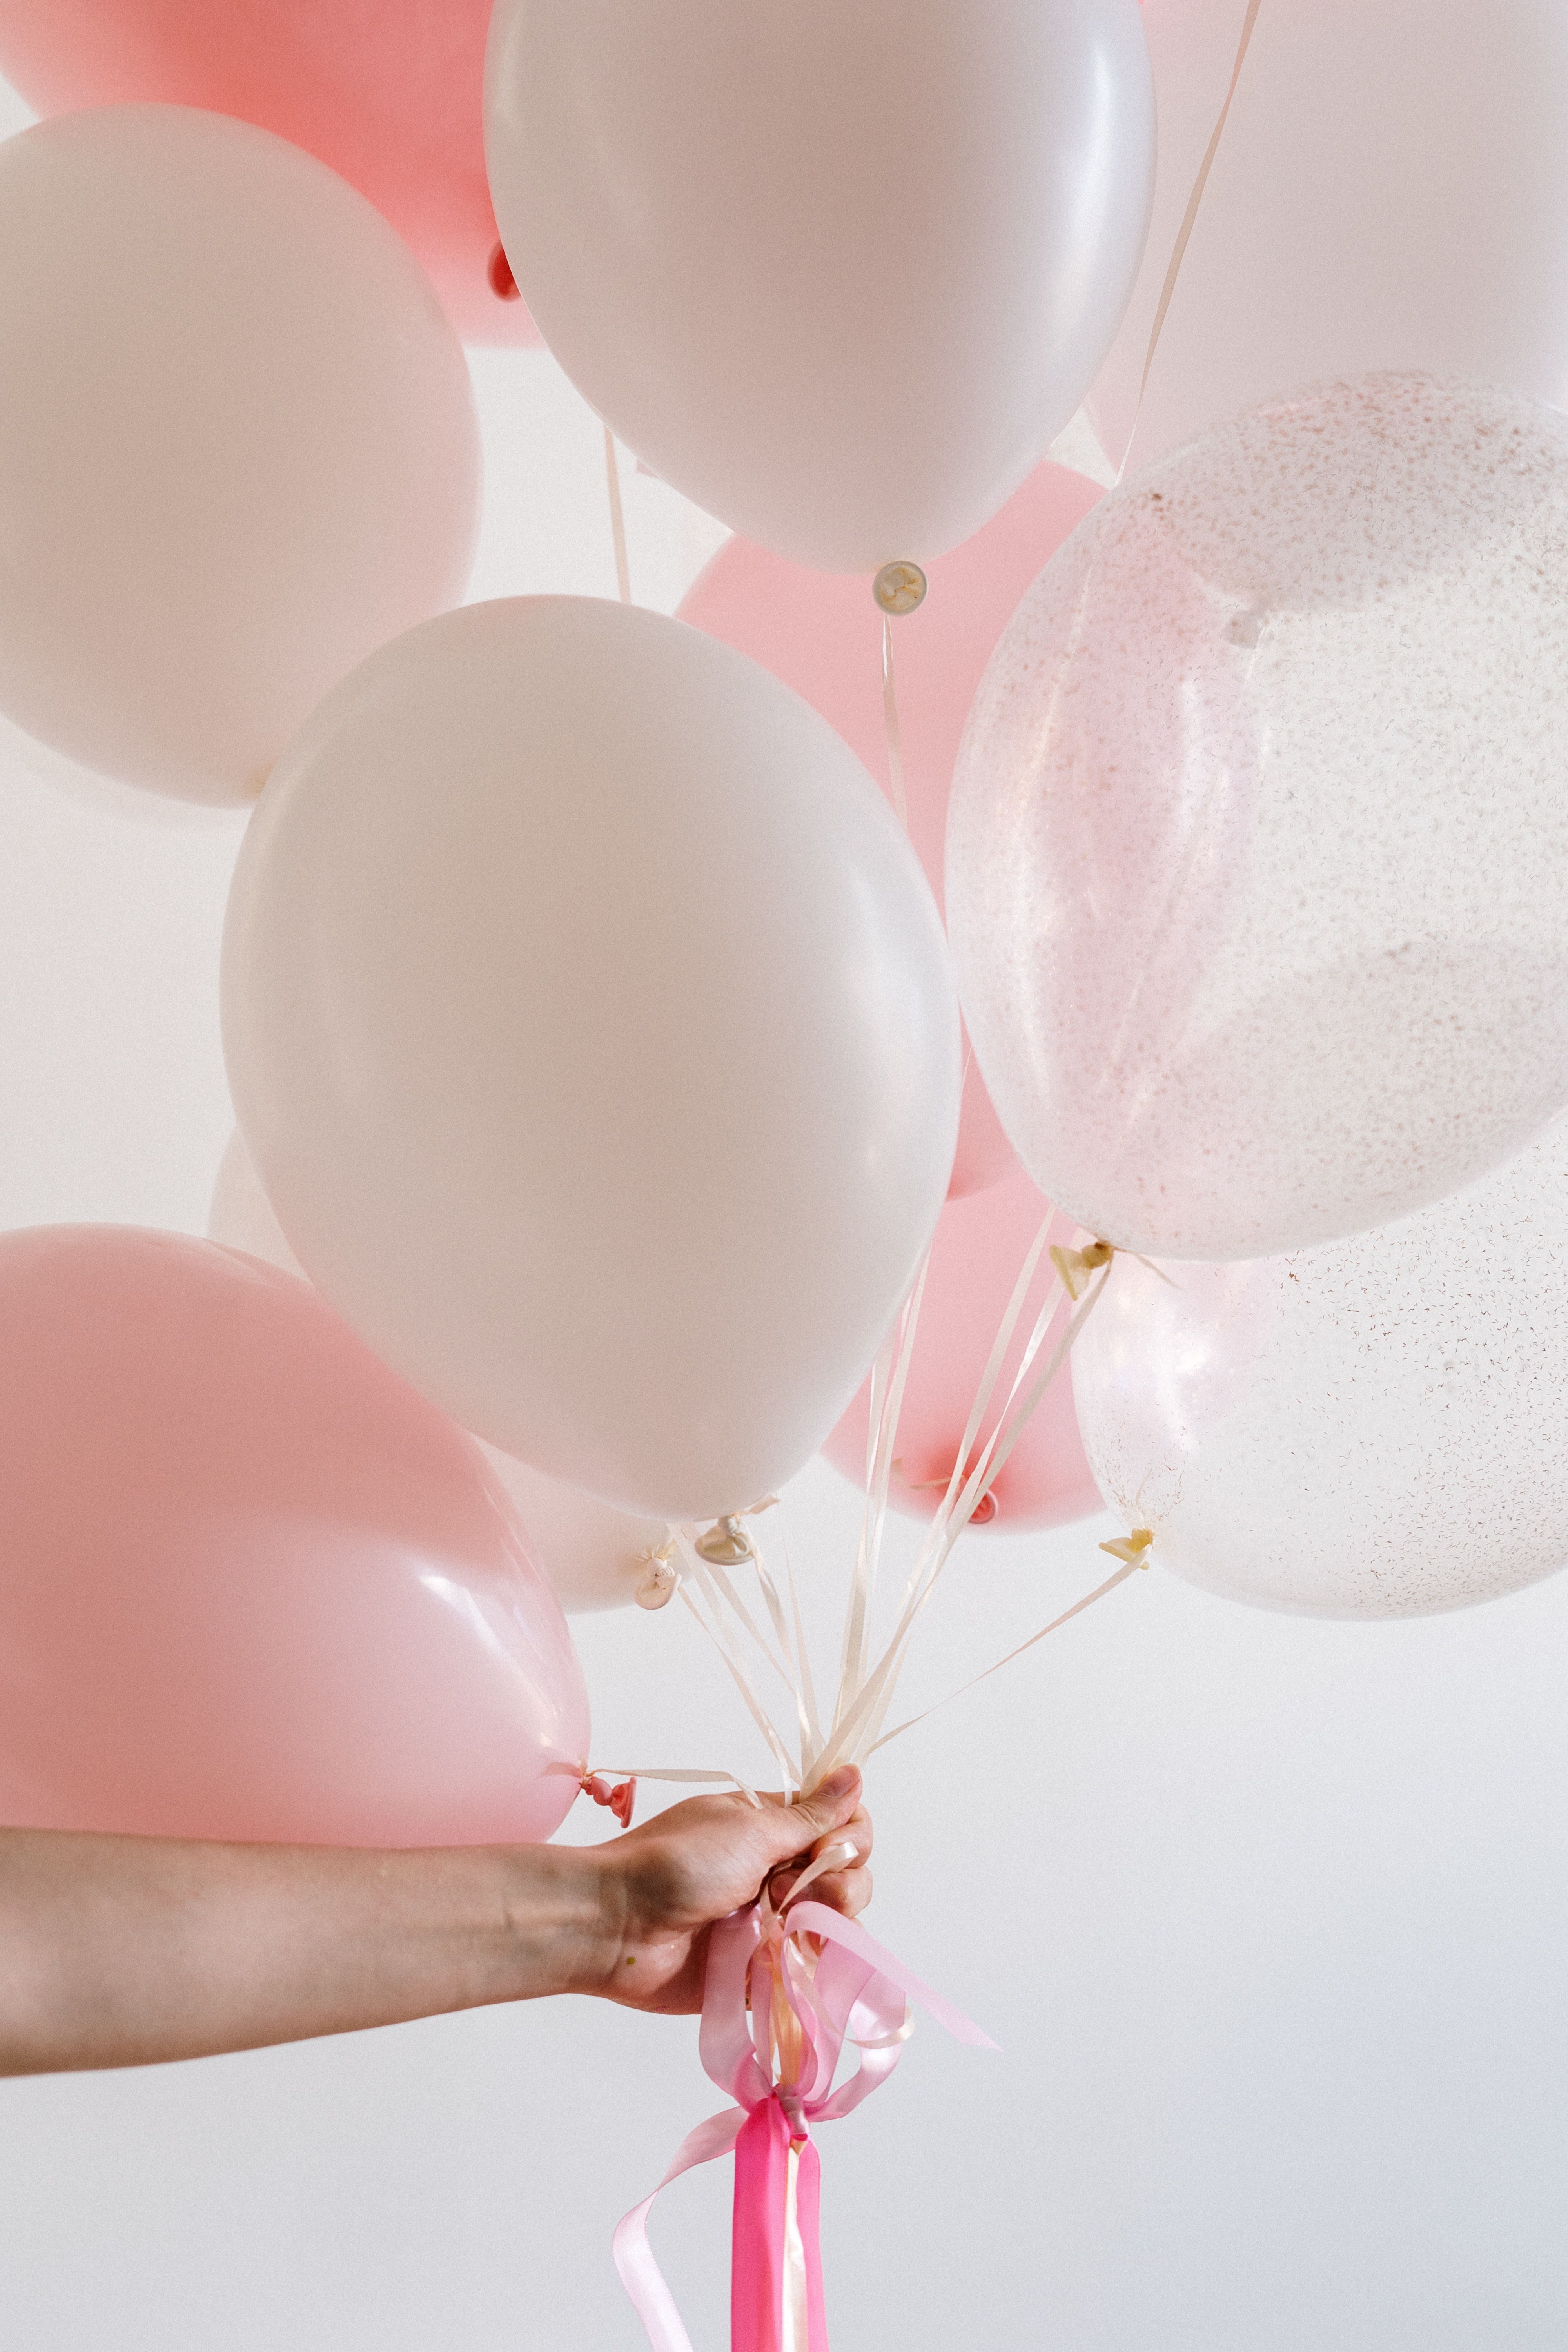 Bouquet of Pink Balloons held by a Person · Free